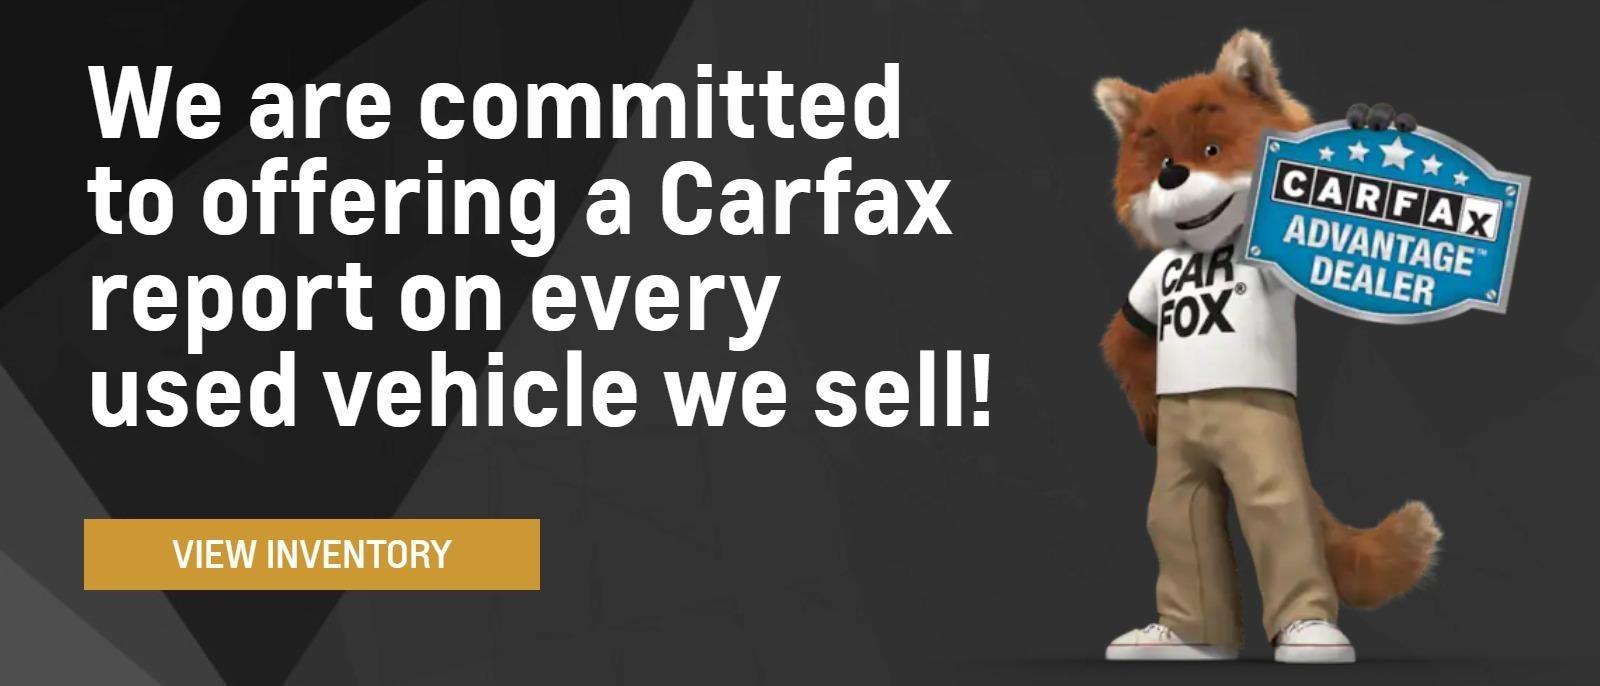 CarFax report on every used vehicle